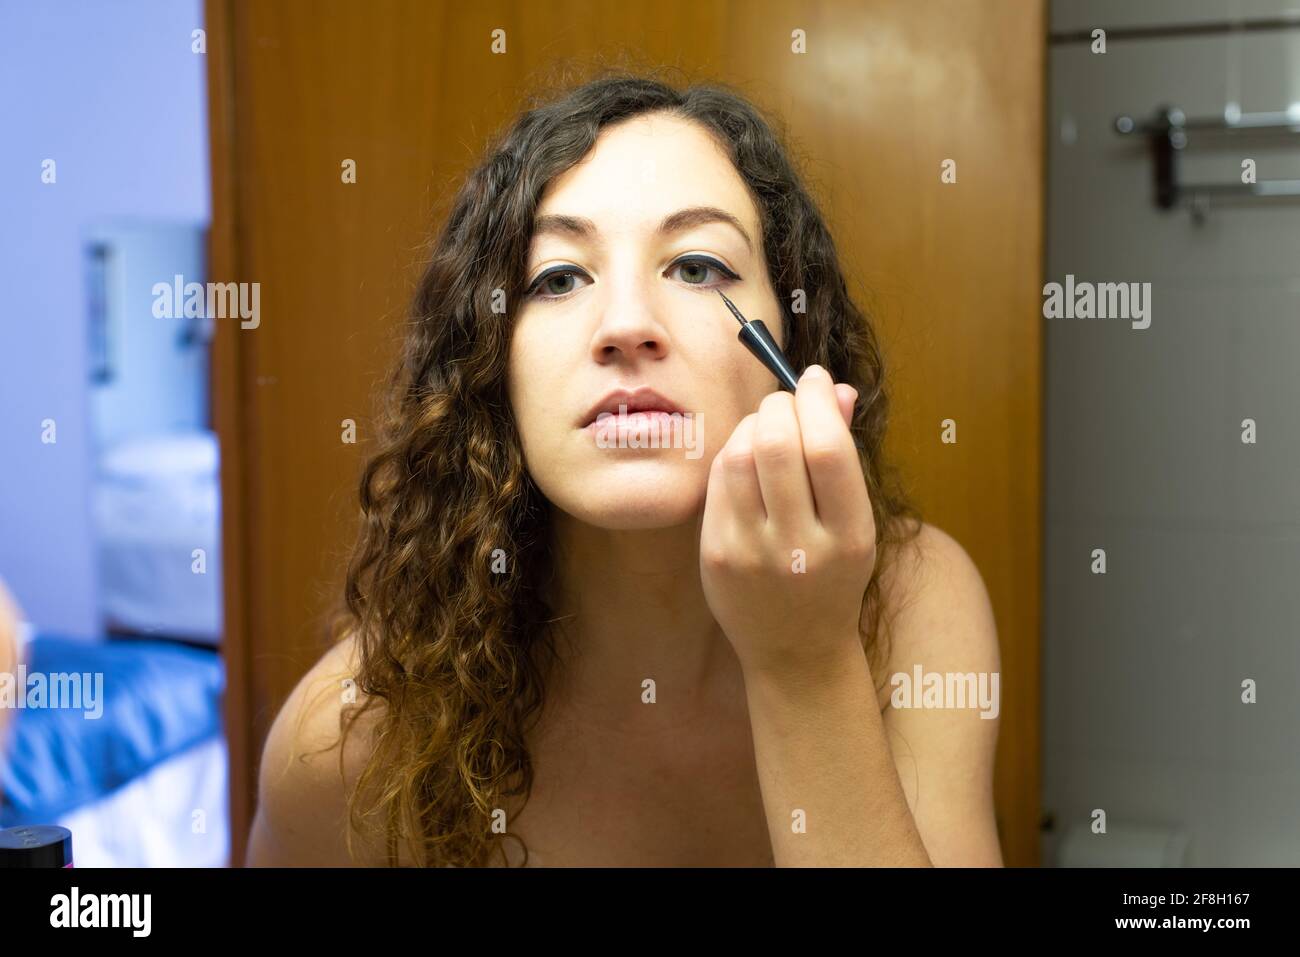 Young woman putting on makeup in front of a mirror. Close-up using eye-liner, drawing the eye line. Stock Photo